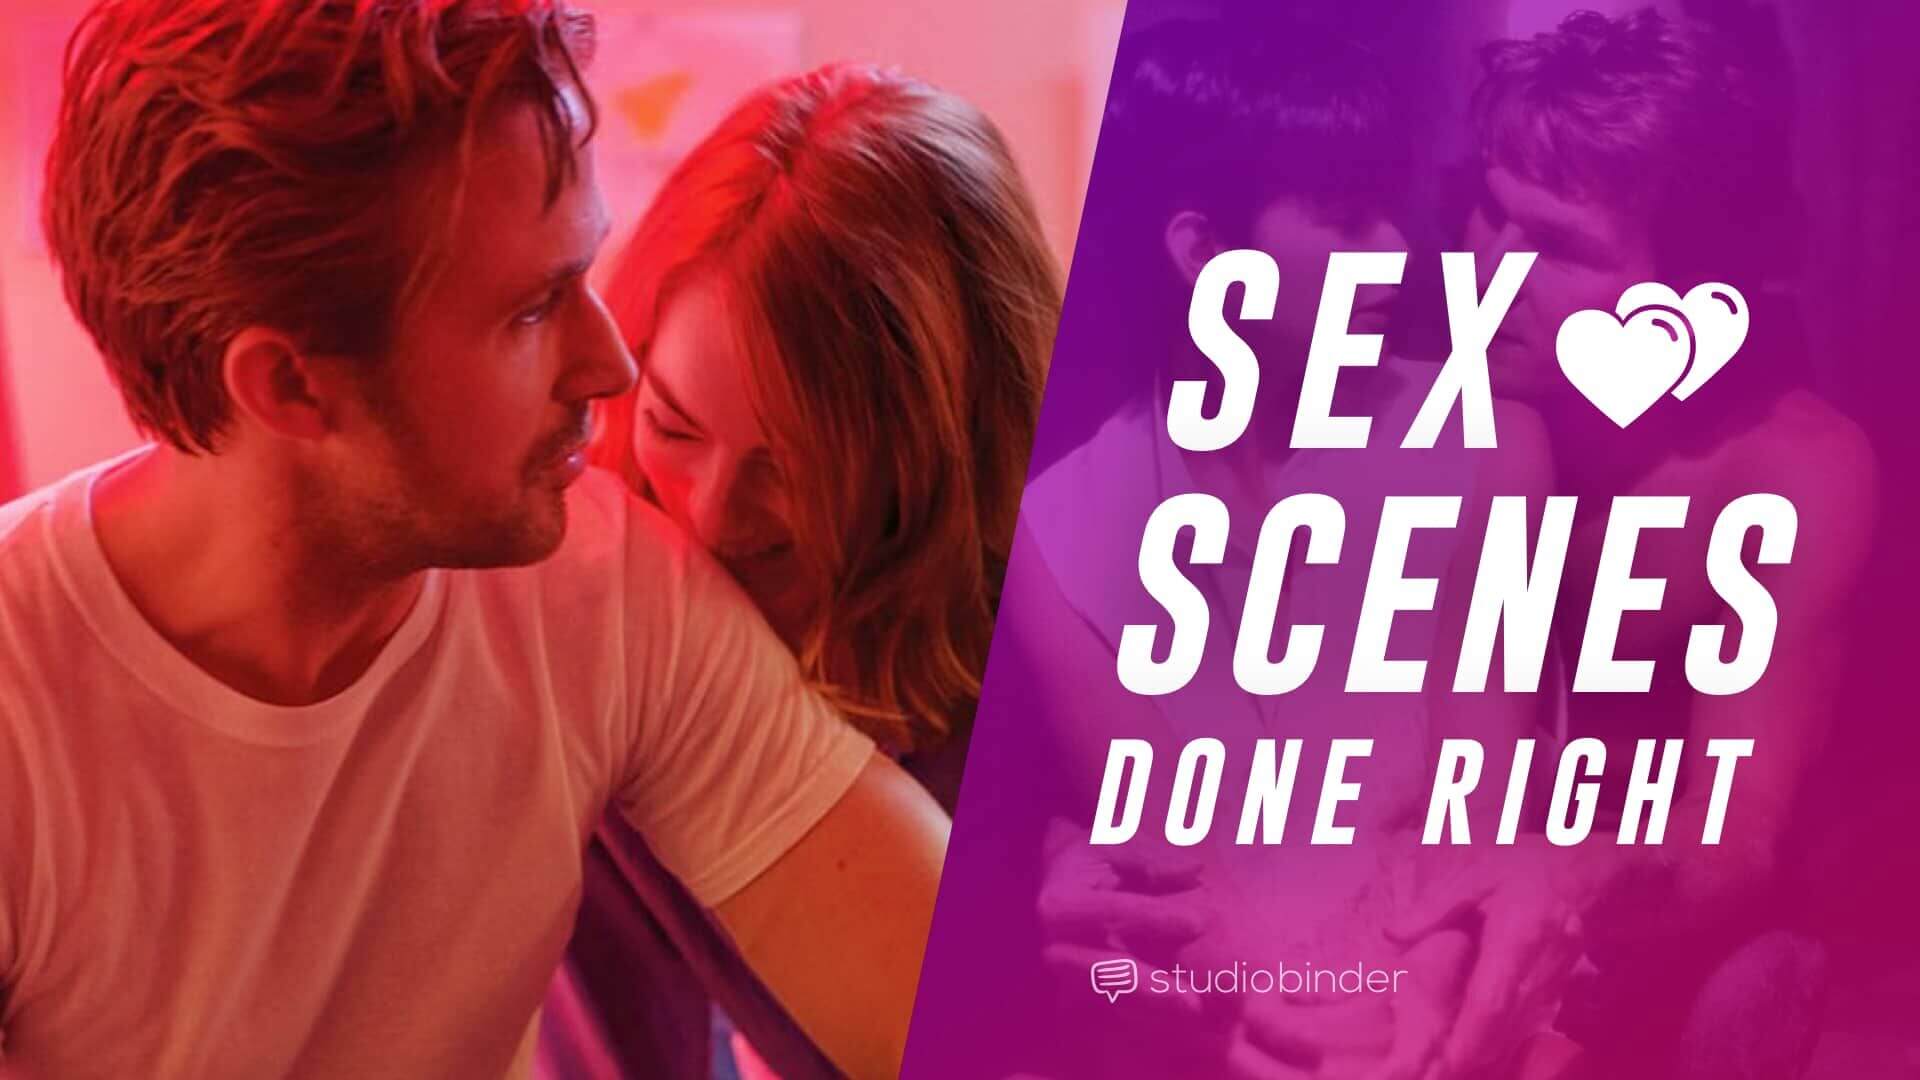 How to make a sex scene not arkward